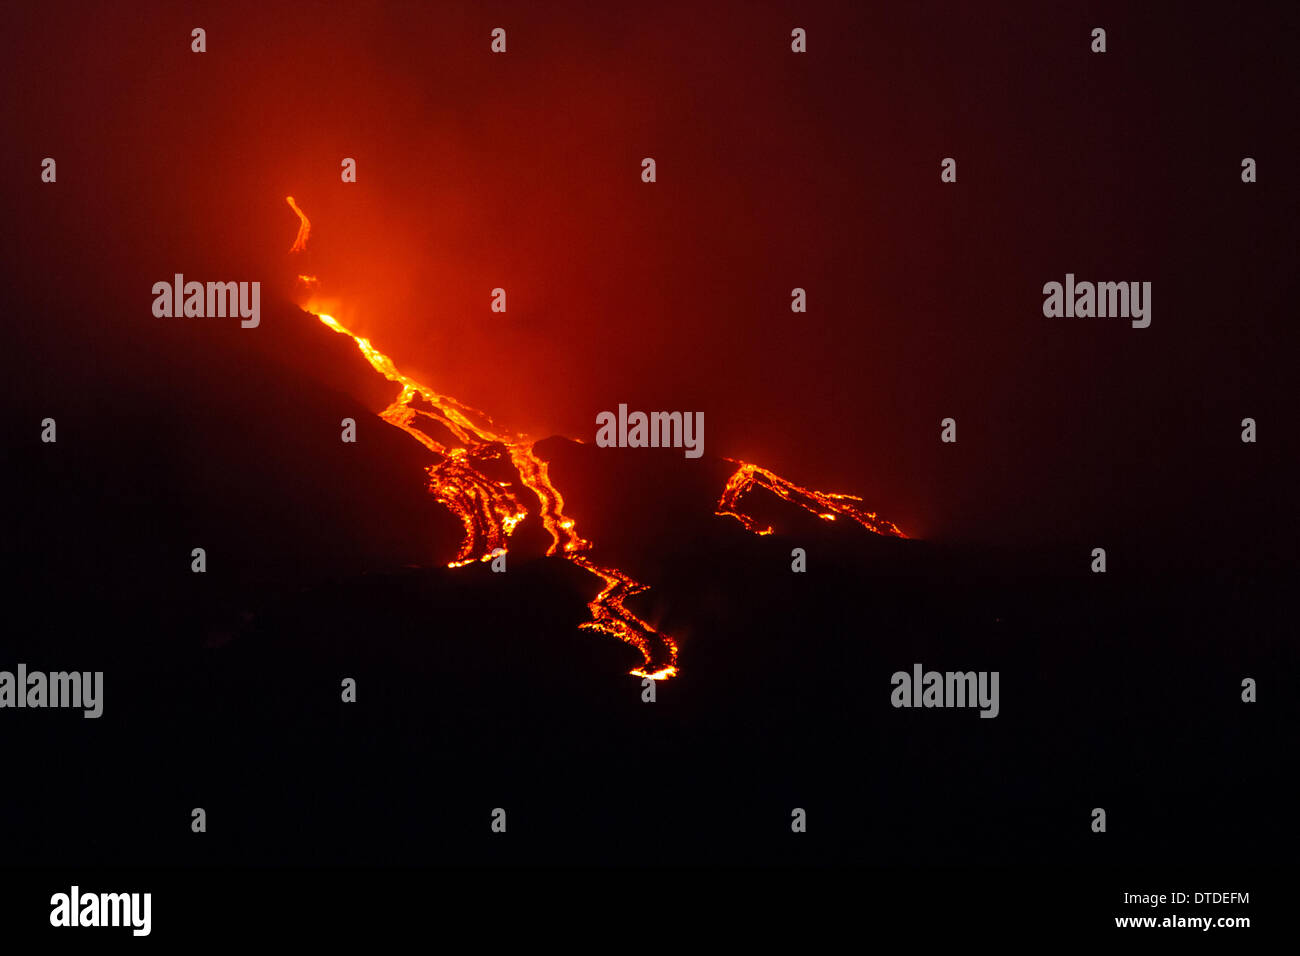 More explosions in the night and lava flow Stock Photo